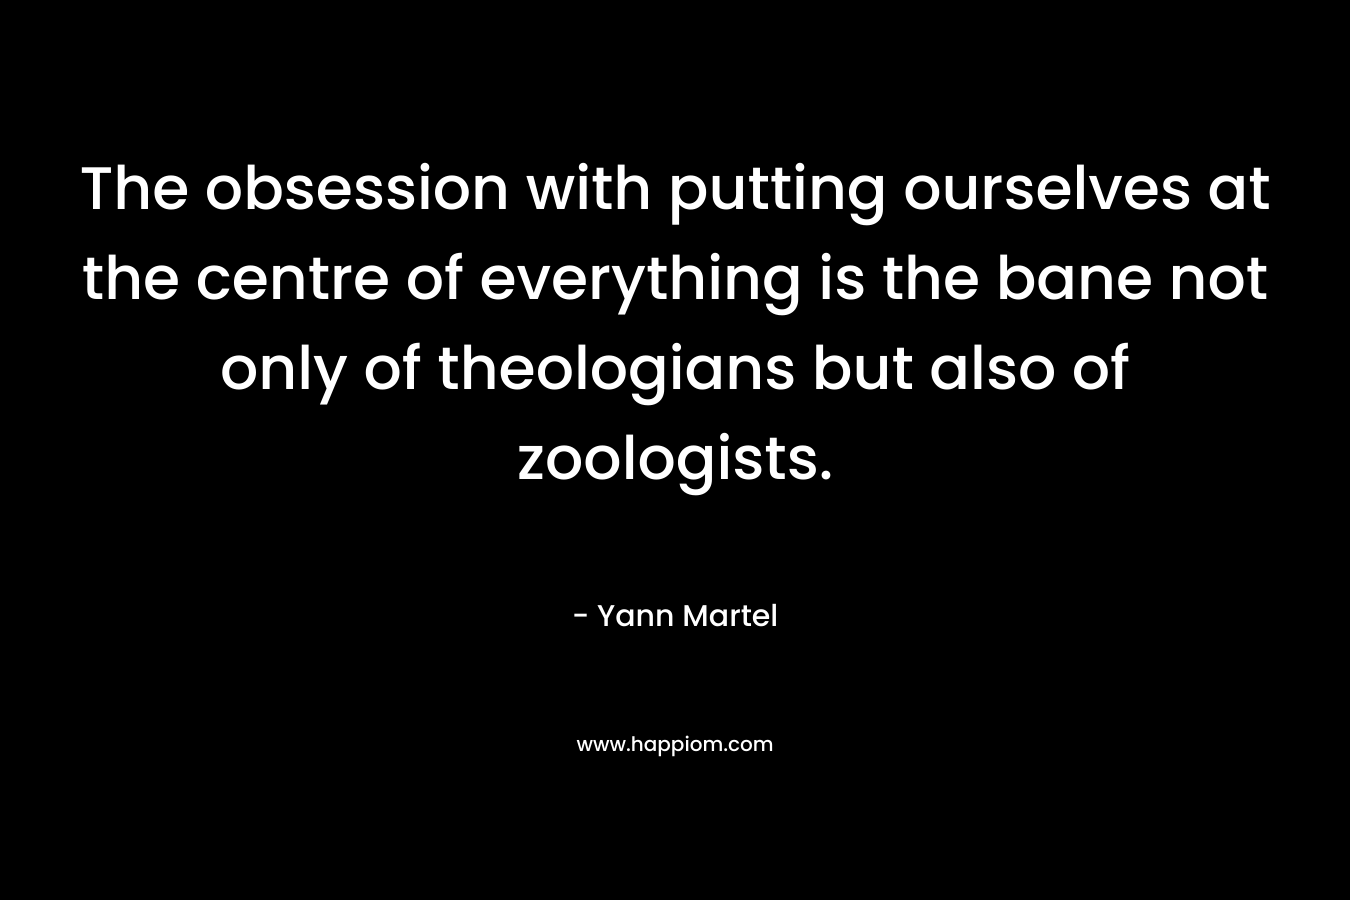 The obsession with putting ourselves at the centre of everything is the bane not only of theologians but also of zoologists. – Yann Martel